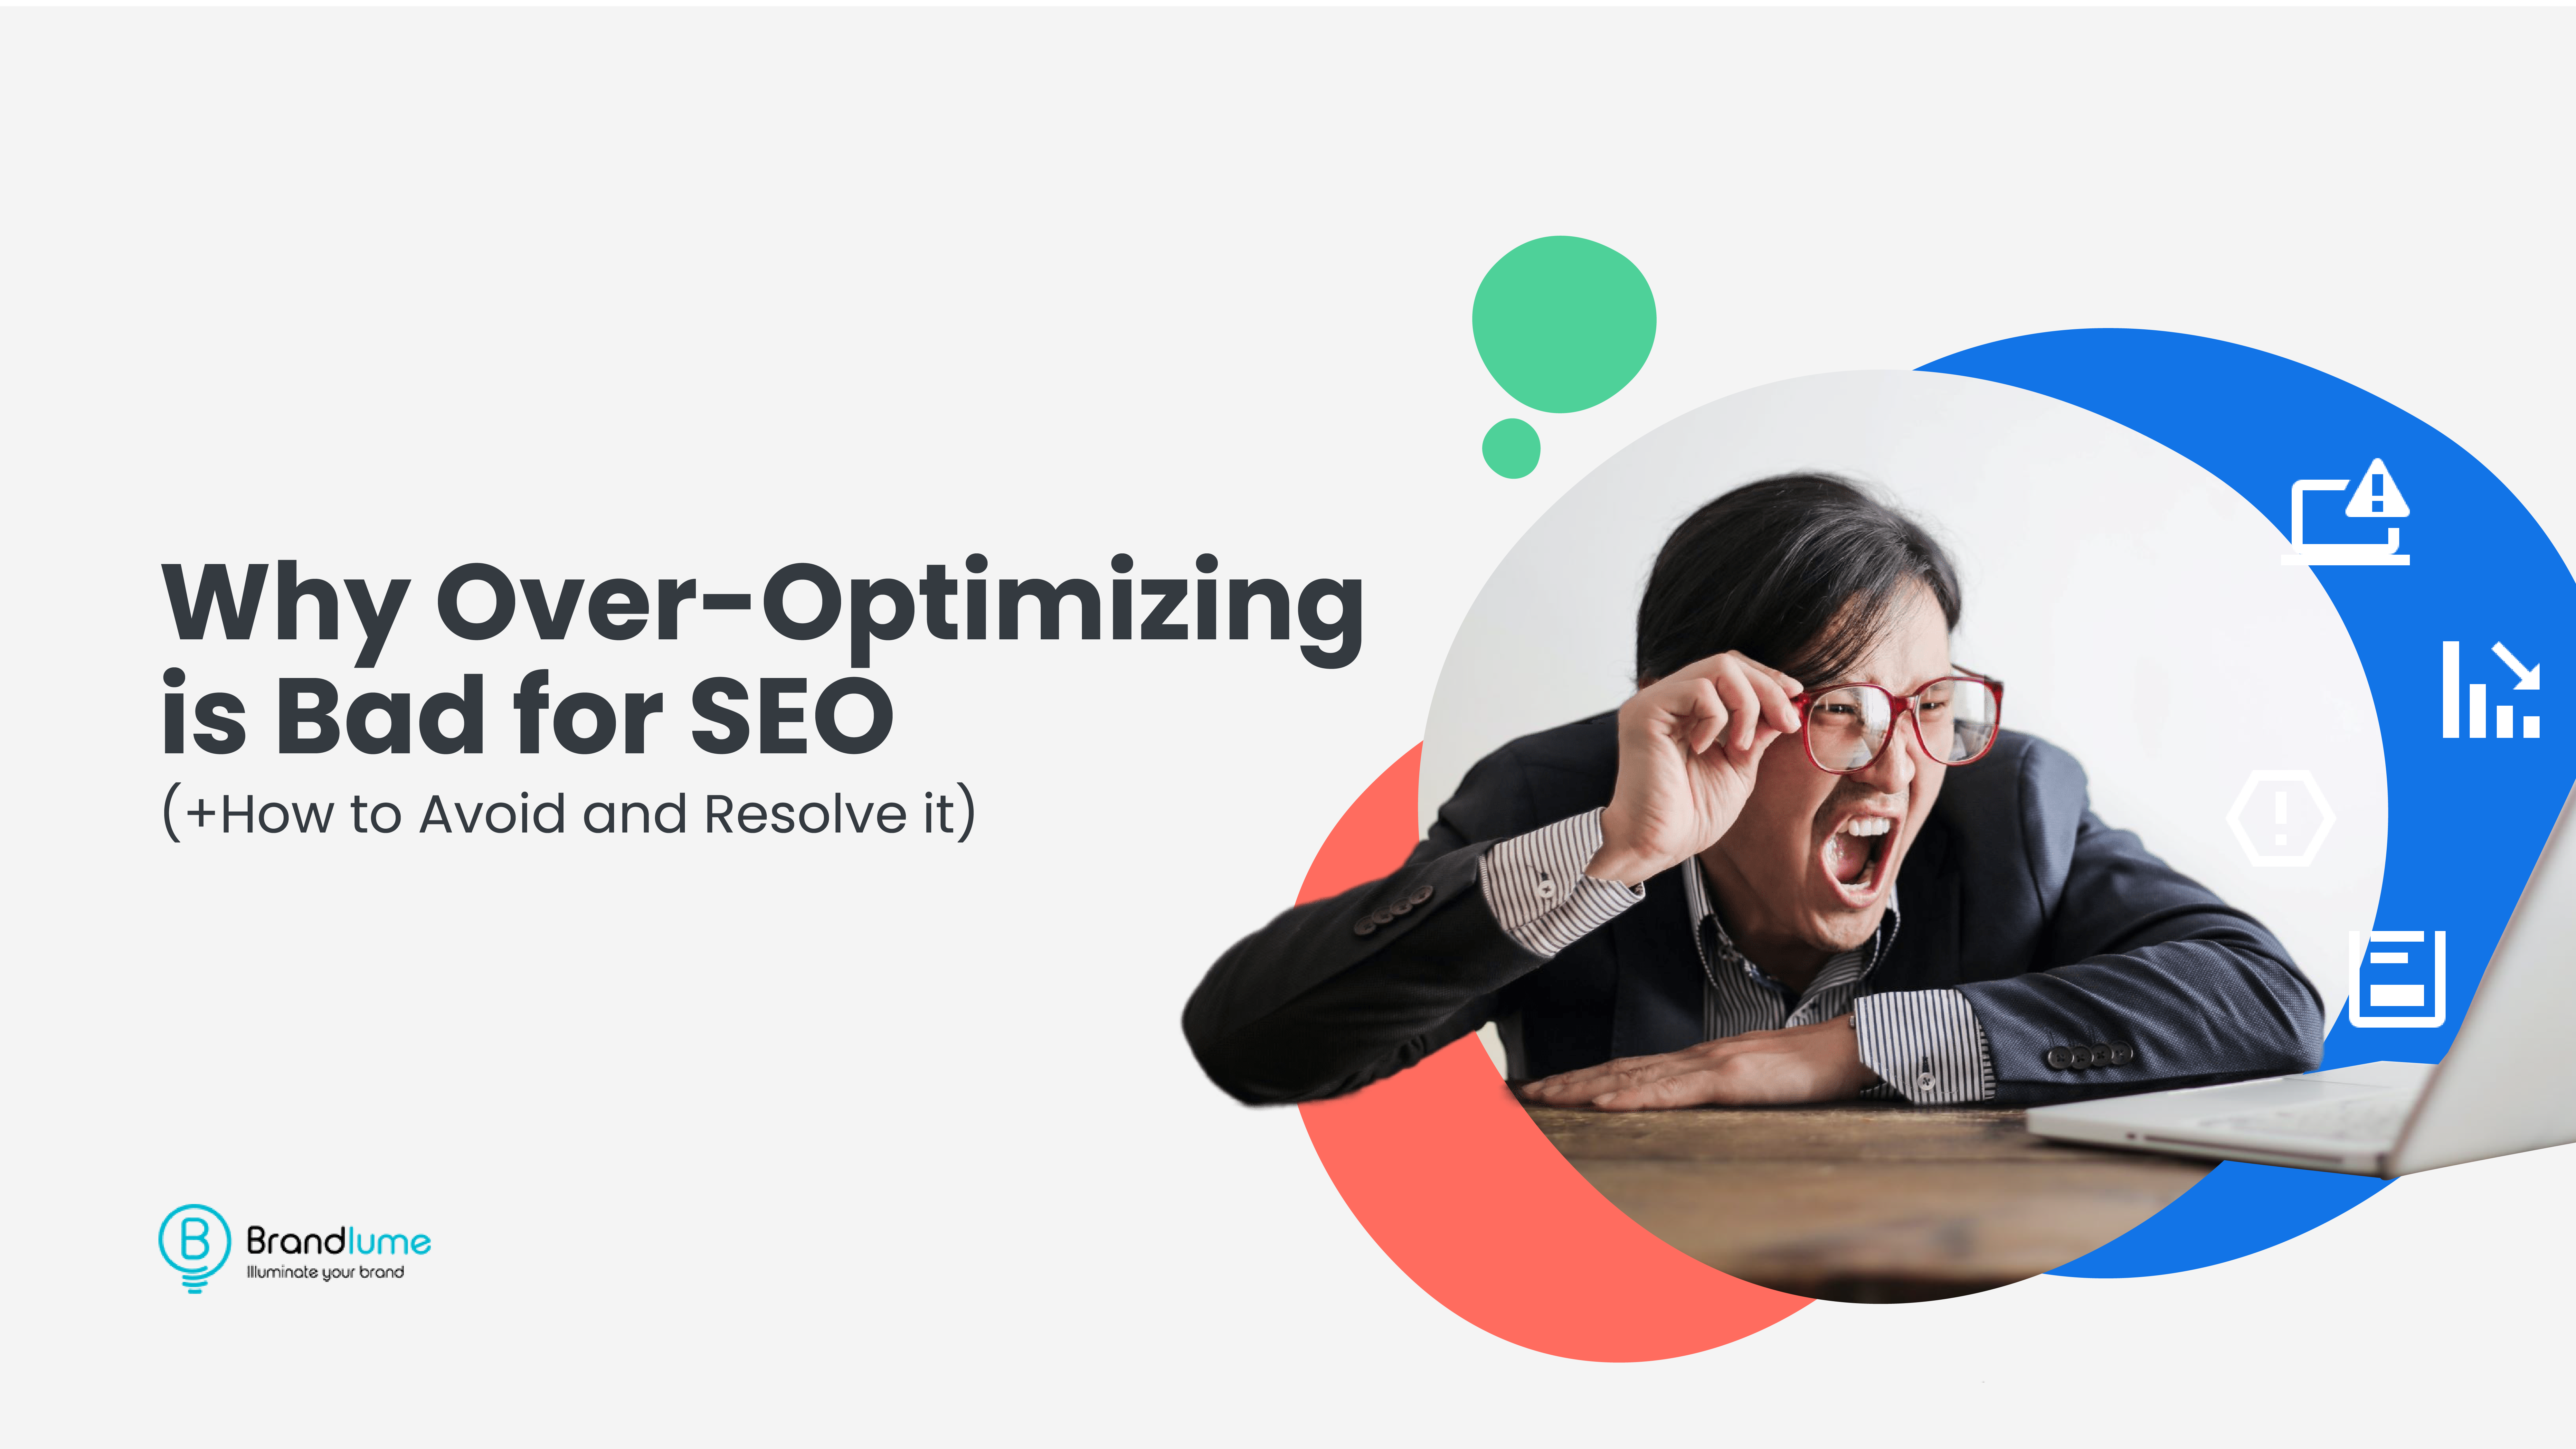 Why is Over-Optimizing Bad for SEO (+How to Avoid it)